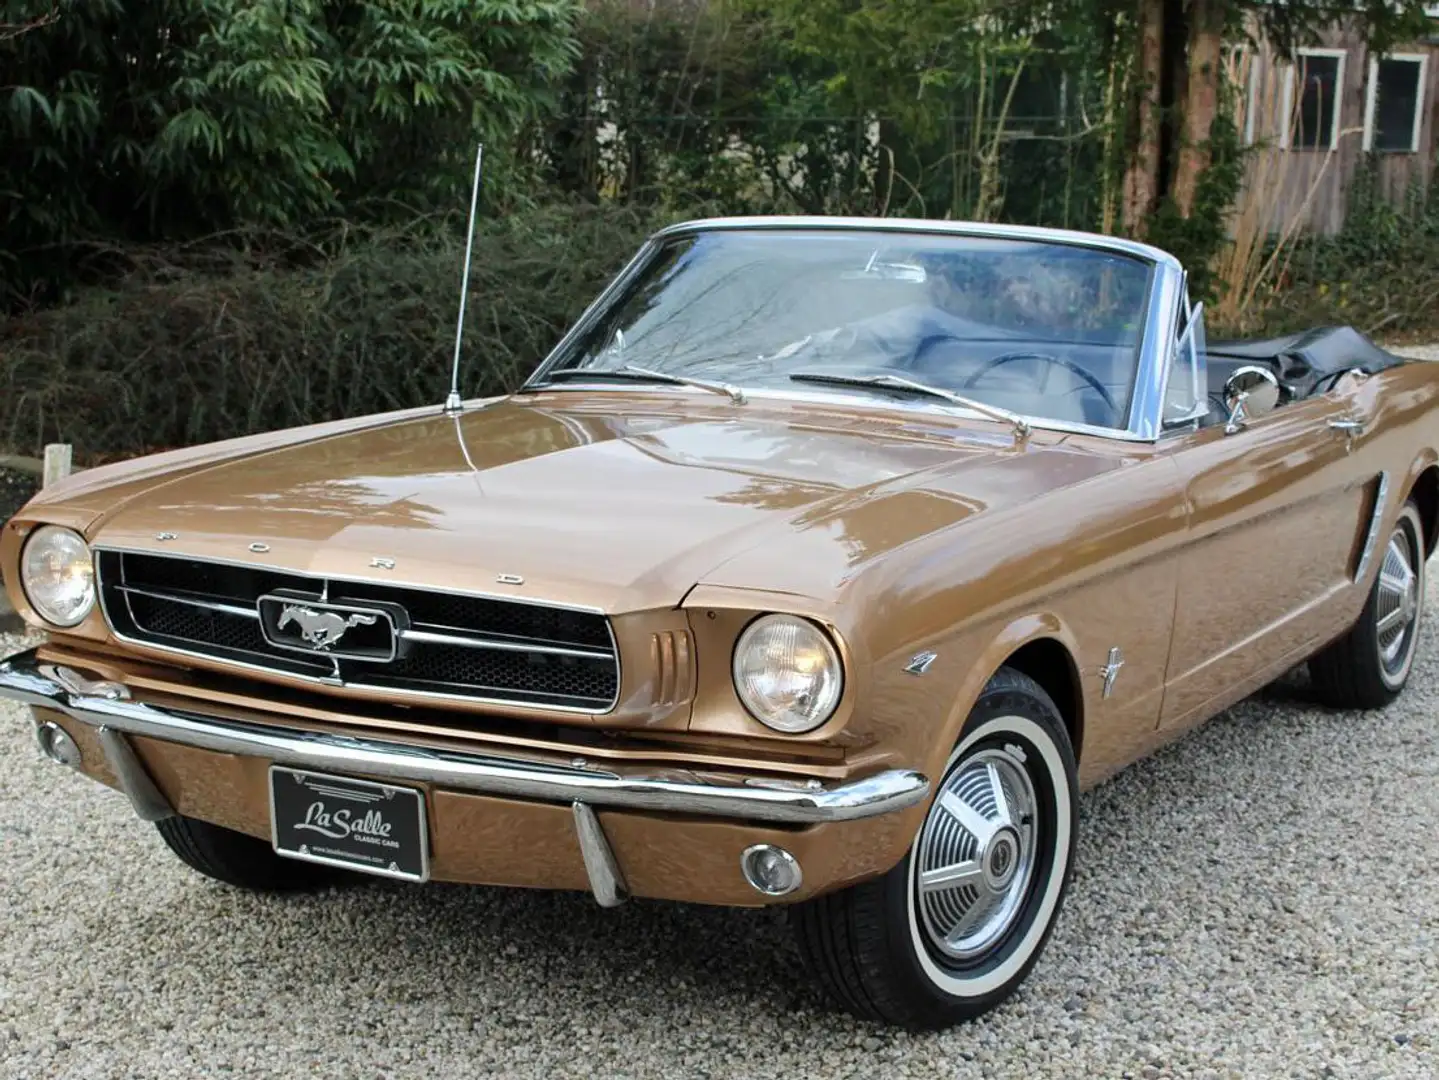 Ford Mustang 1965 289 V8 aut, Convertible Bronze - 1